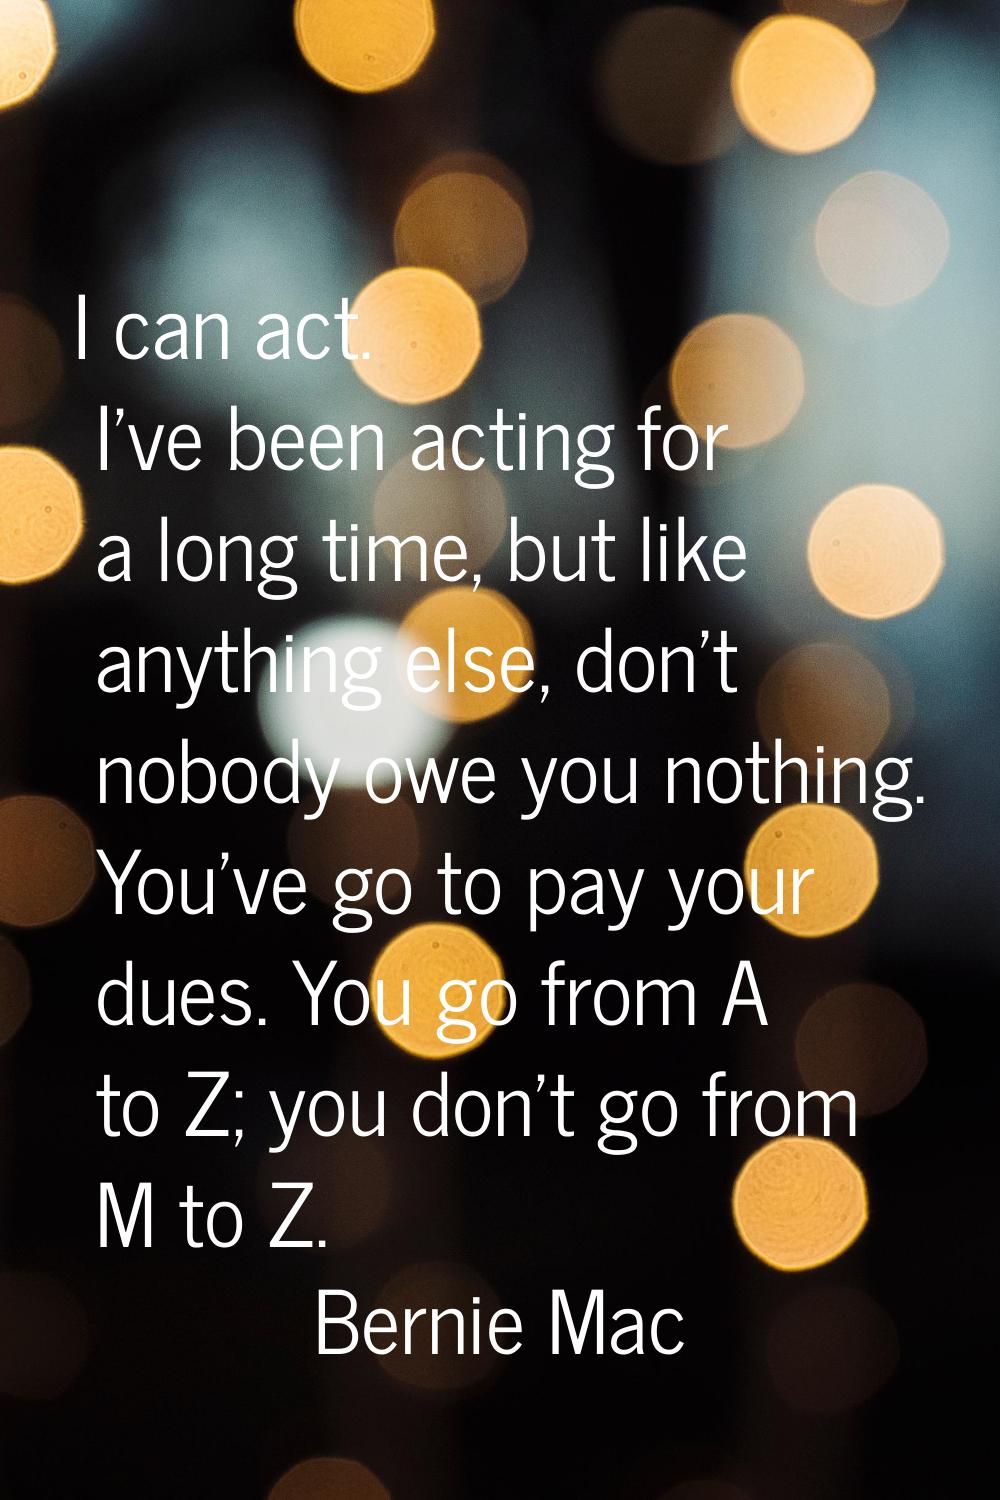 I can act. I've been acting for a long time, but like anything else, don't nobody owe you nothing. 